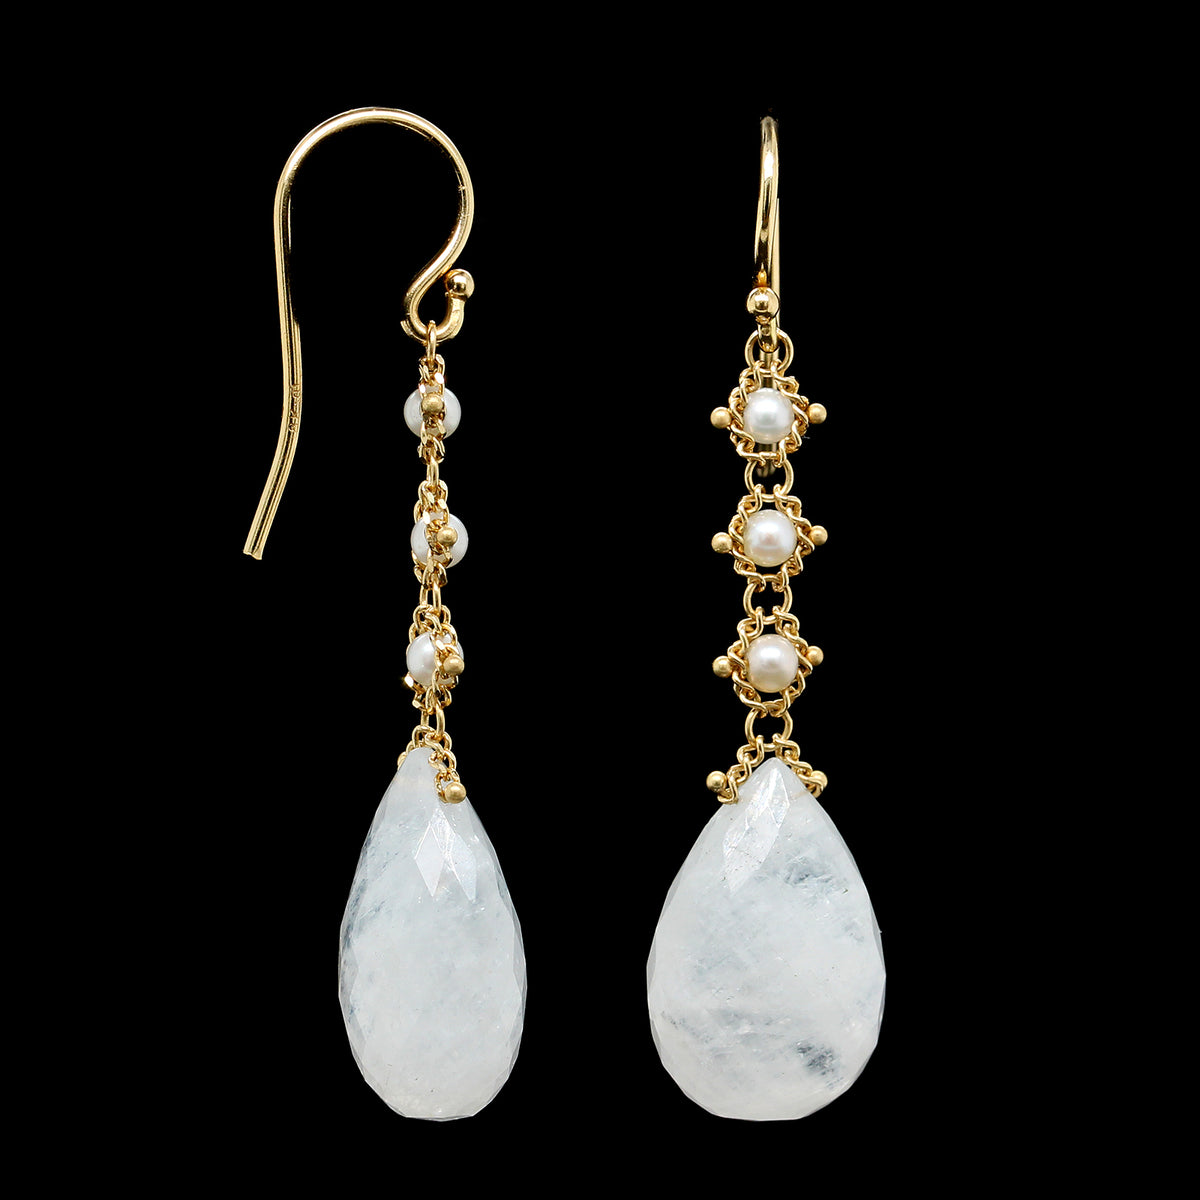 Amali 18K Yellow Gold Estate Cultured Pearl and Faceted Quartz Drop Earrings